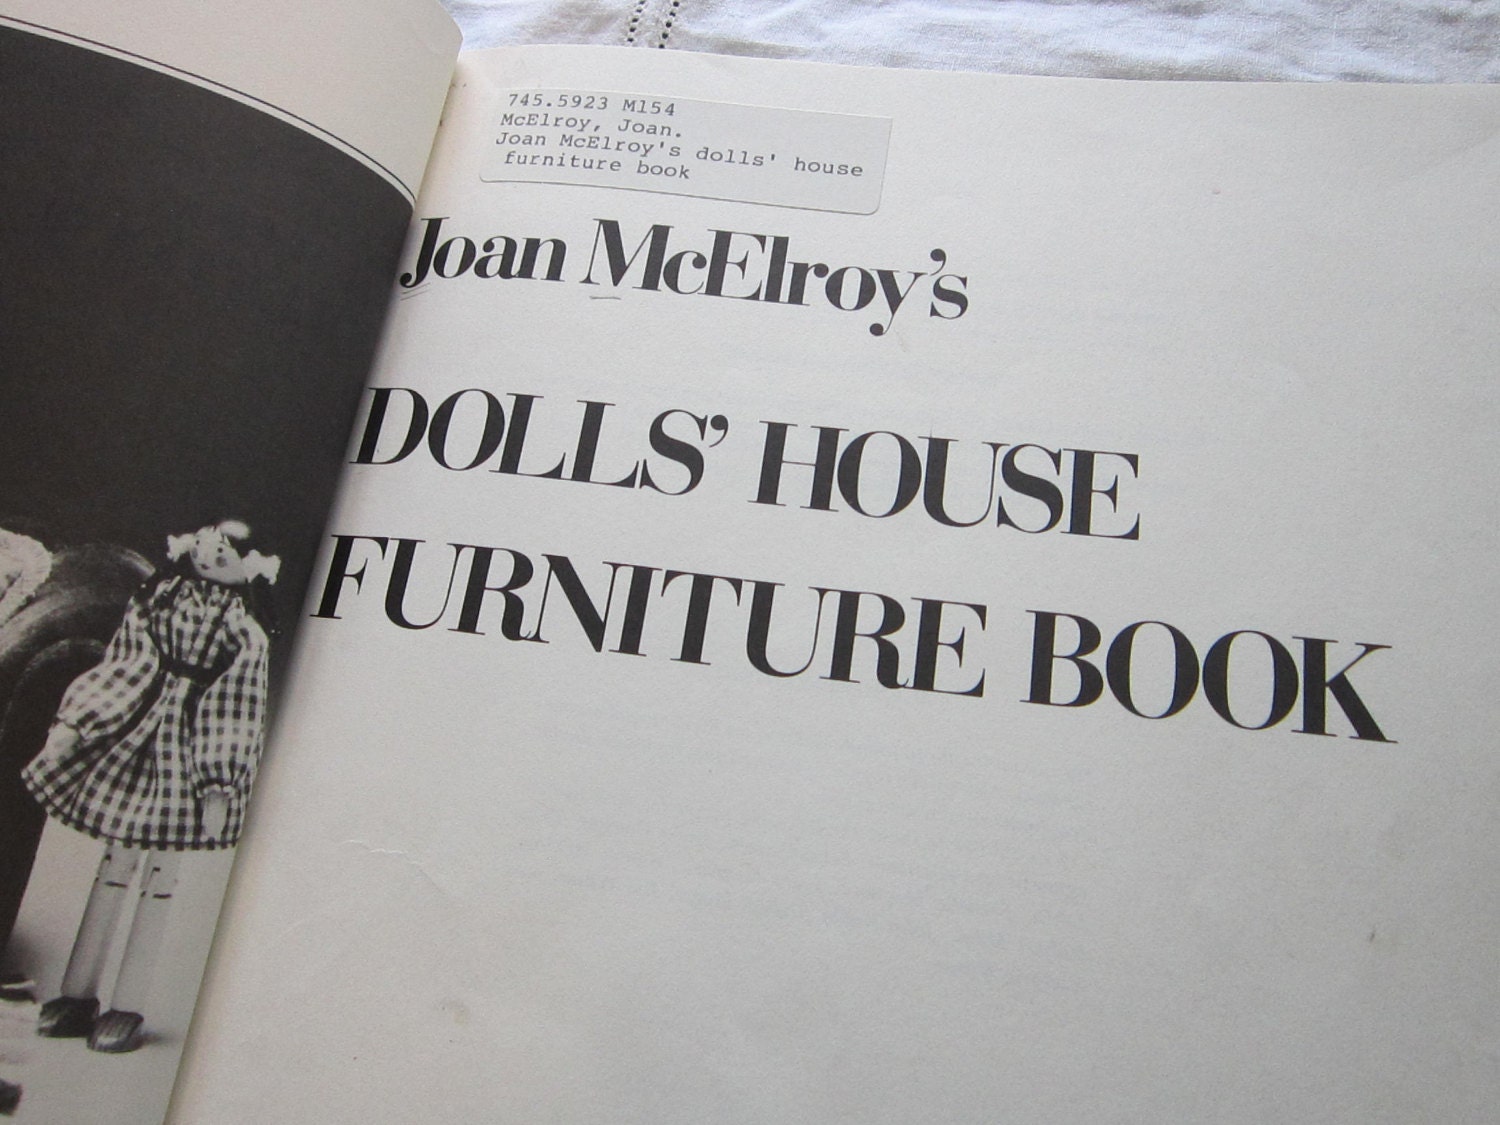 JOAN MCELROY'S DOLLS' HOUSE FURNITURE BOOK Joan McElroy and Illustrated